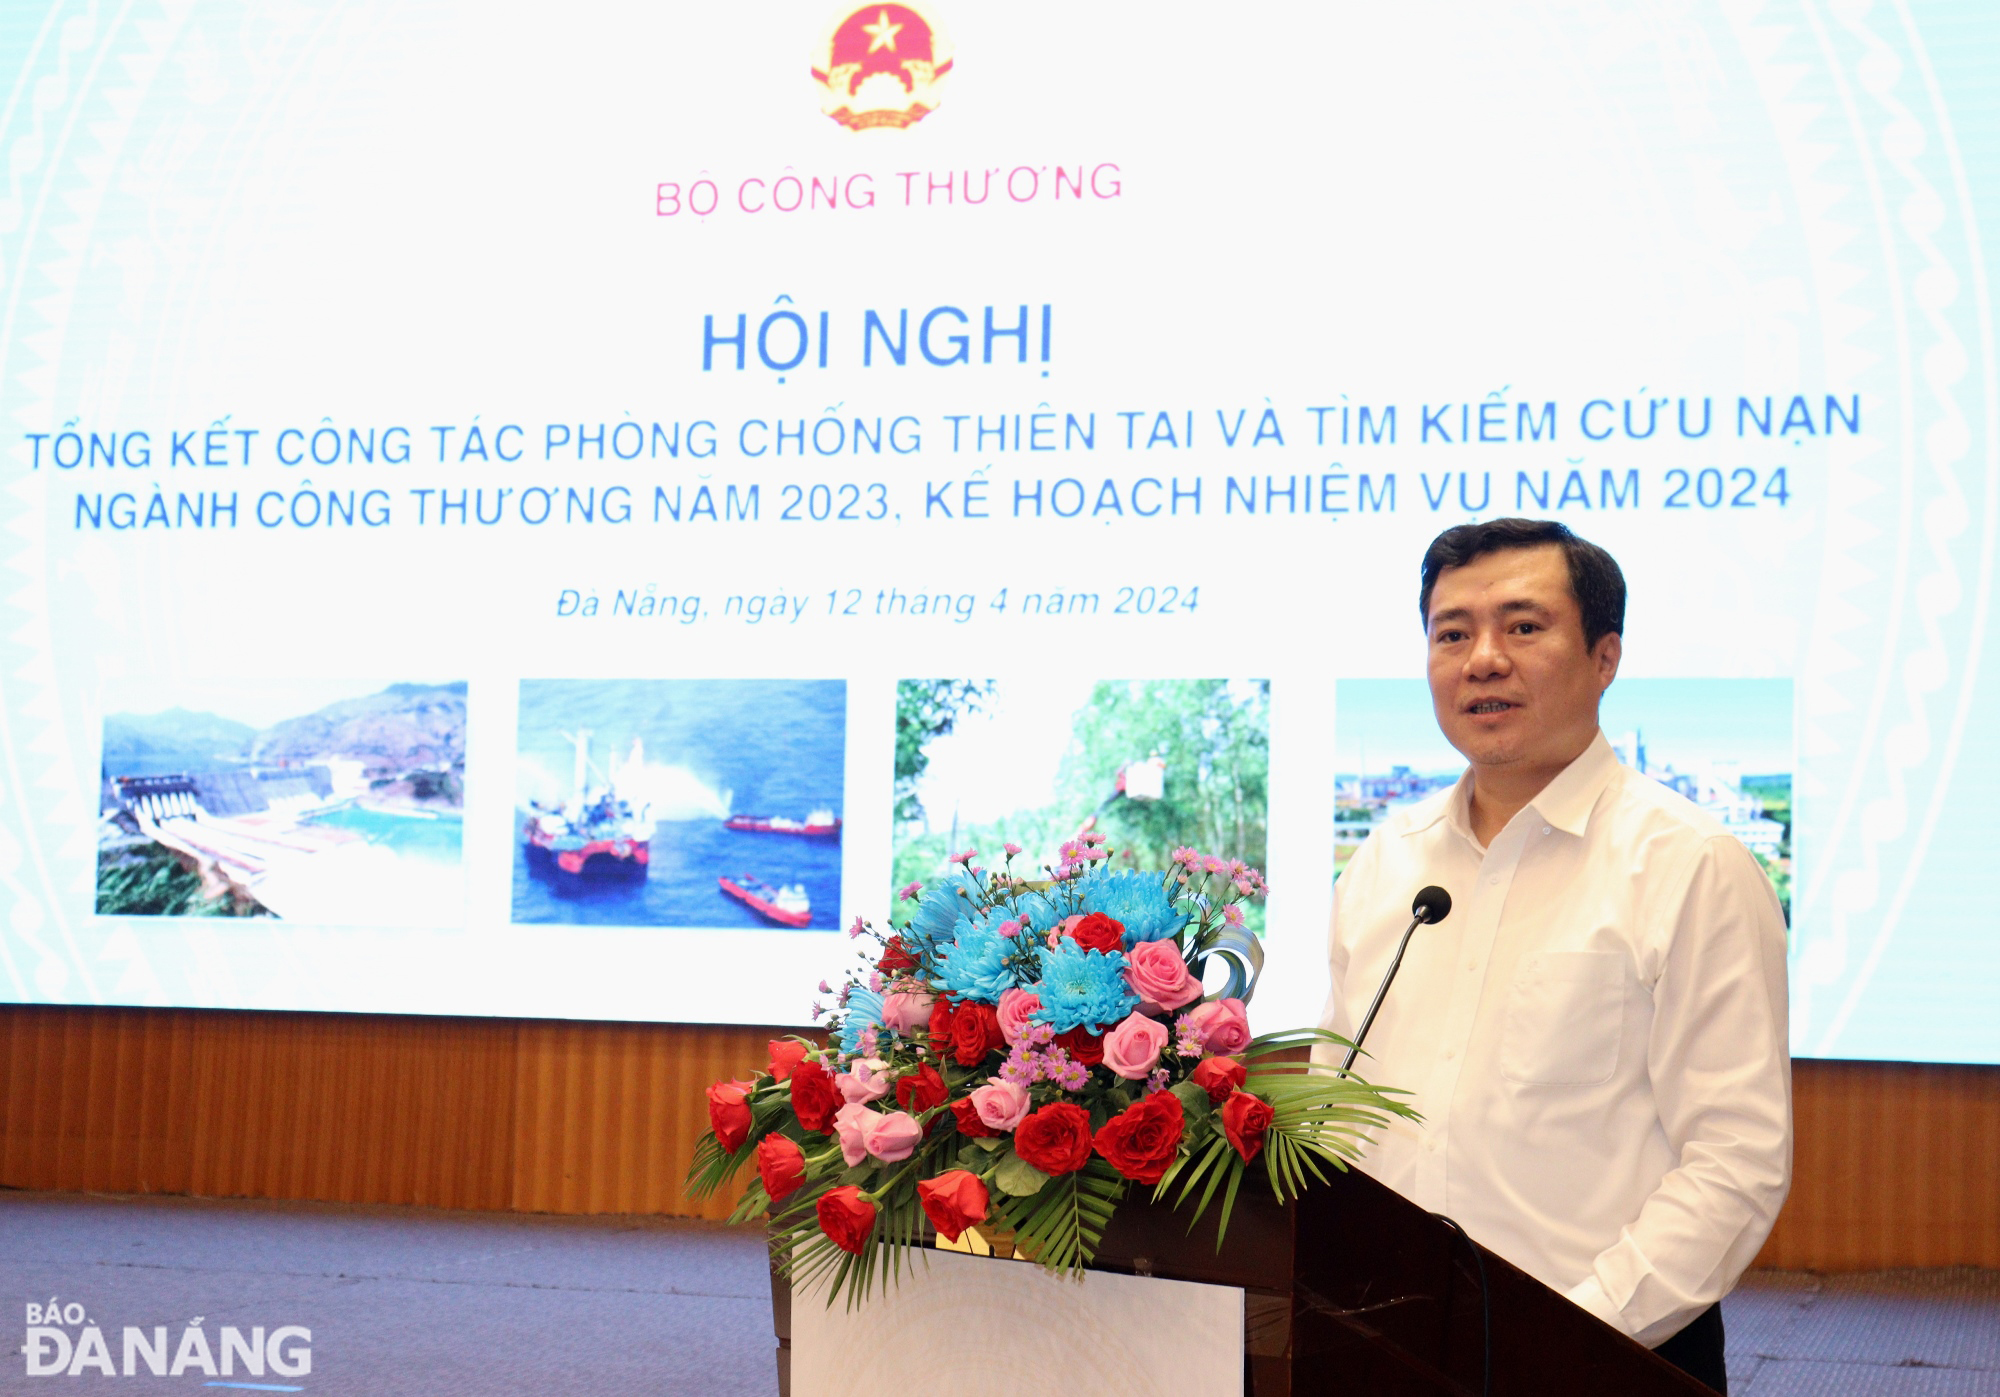 Deputy Minister of Industry and Trade Nguyen Sinh Nhat Tan speaking at the conference. Photo: HOANG HIEP